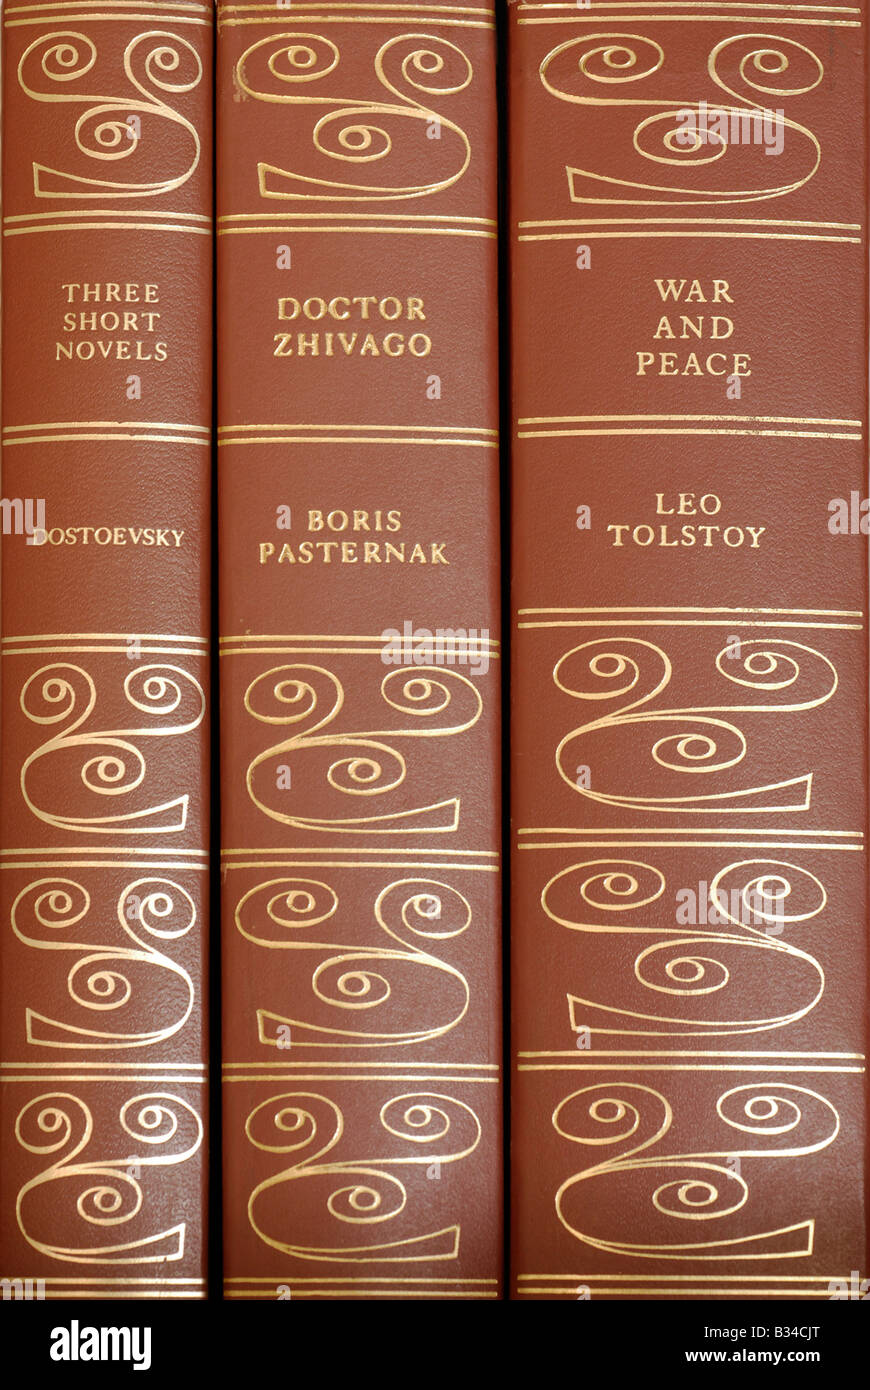 Book Spines, Russian Authors Stock Photo